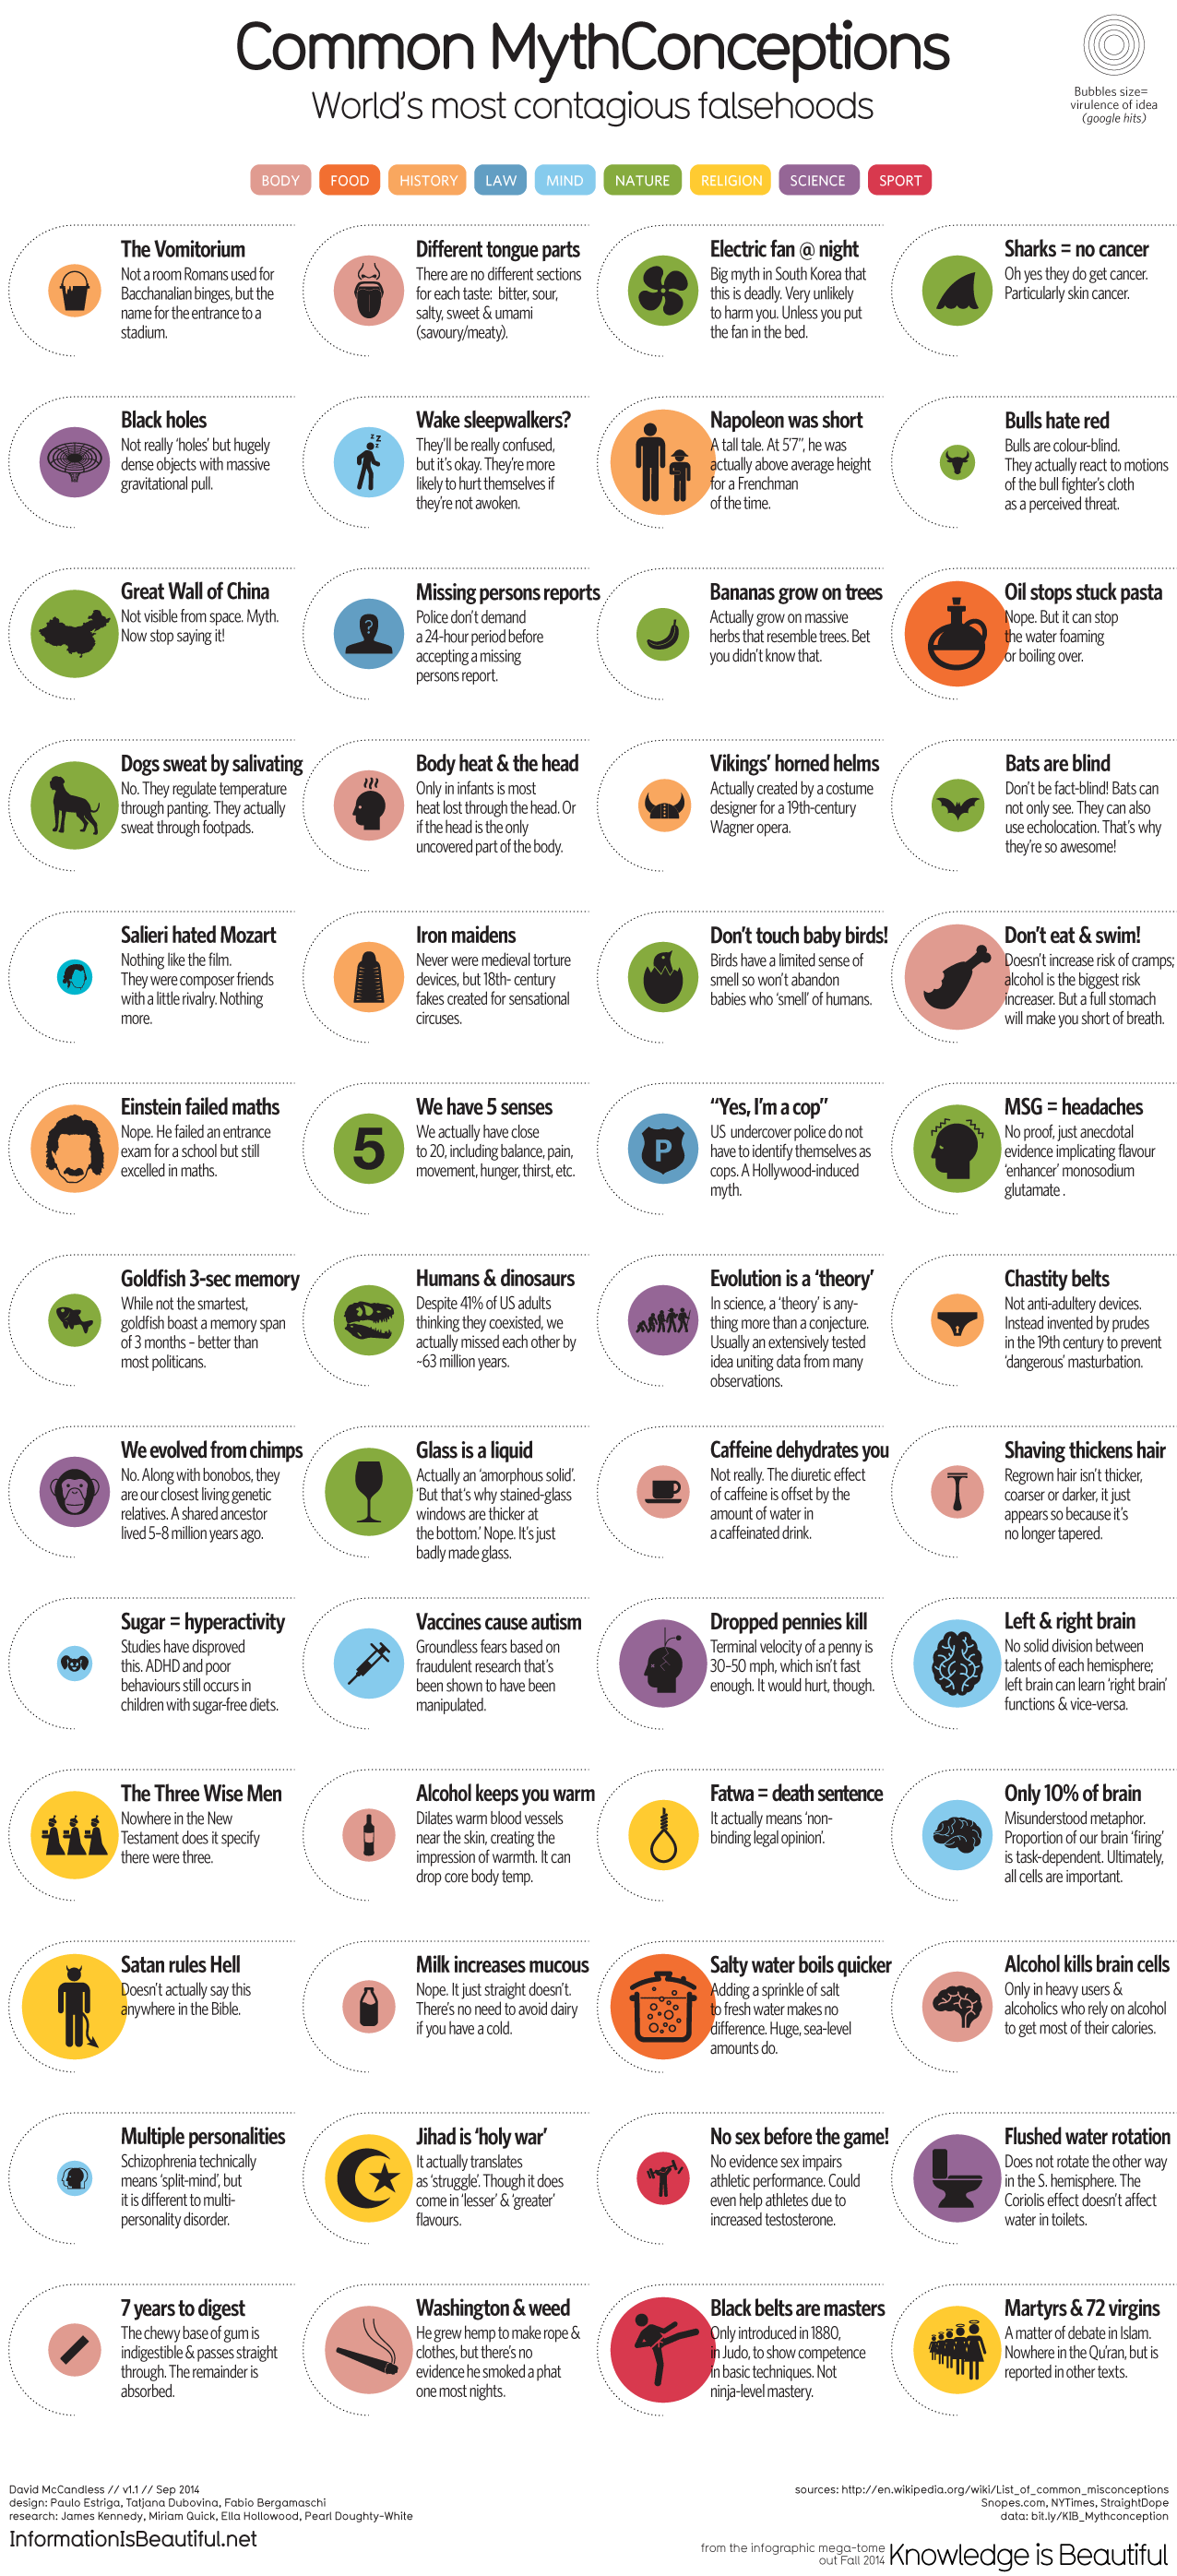 1276_Common-Mythconceptions_Oct22nd